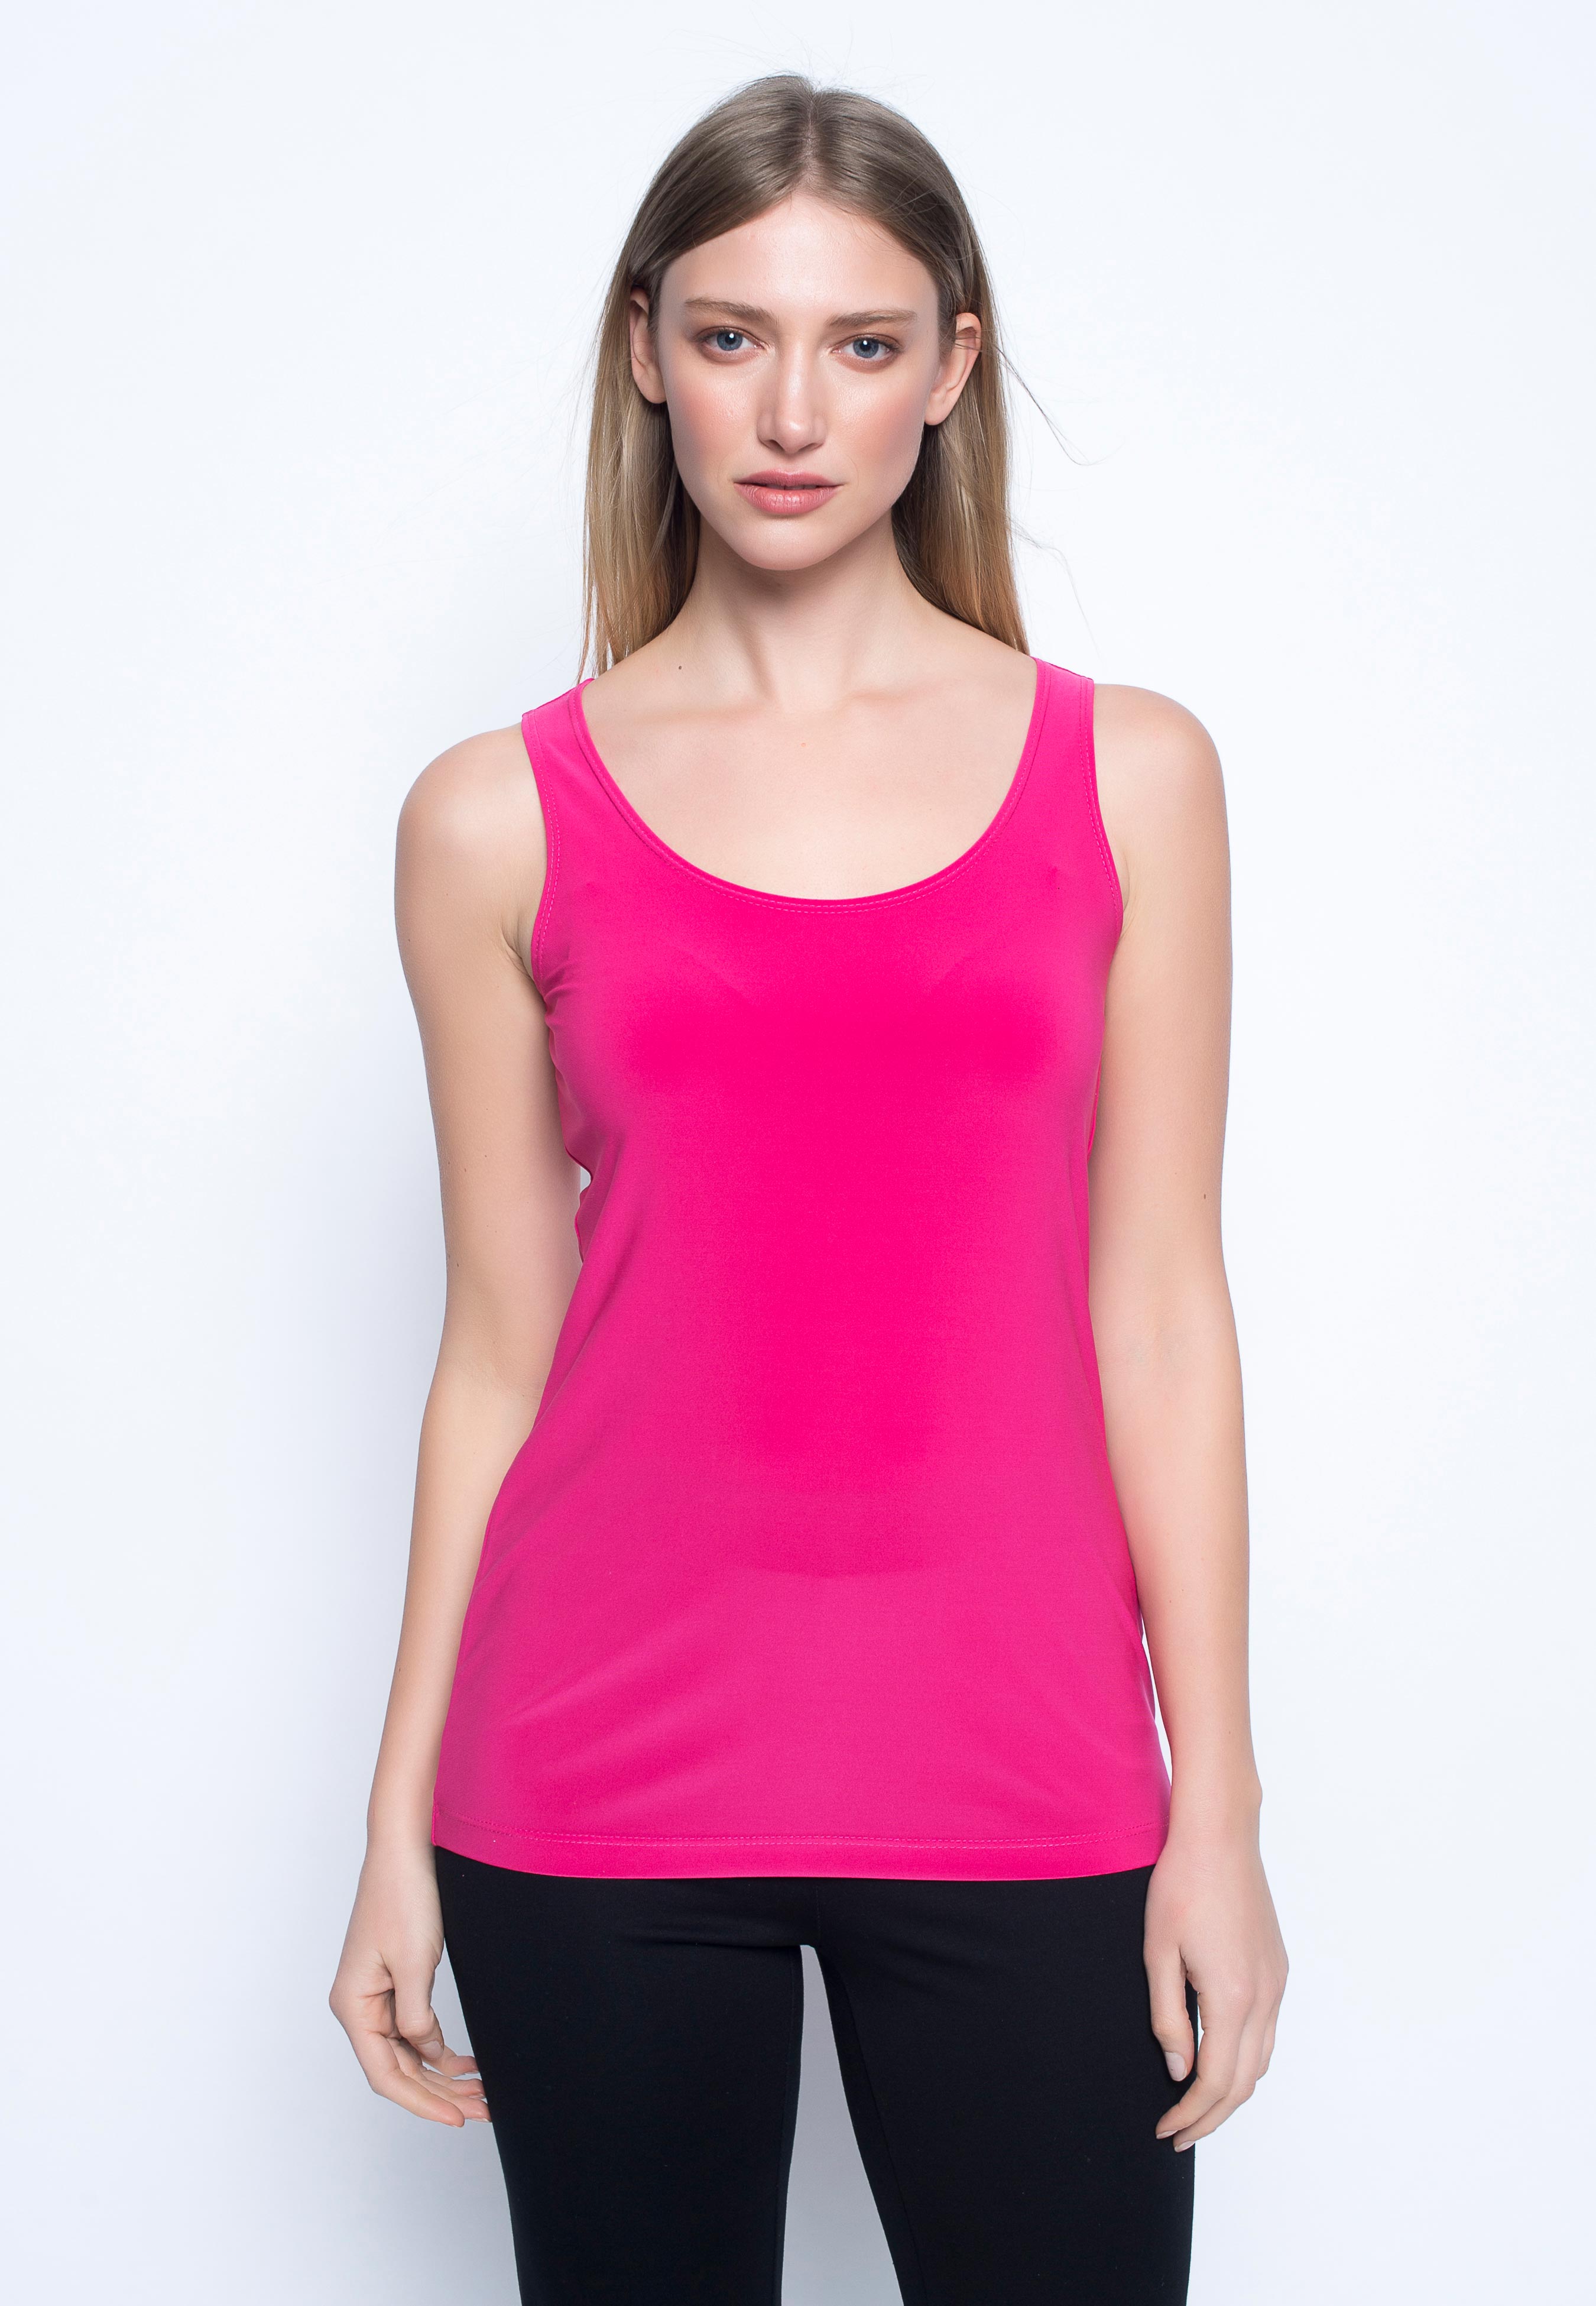 Scoop Neck Tank in hot pink by Picadilly canada